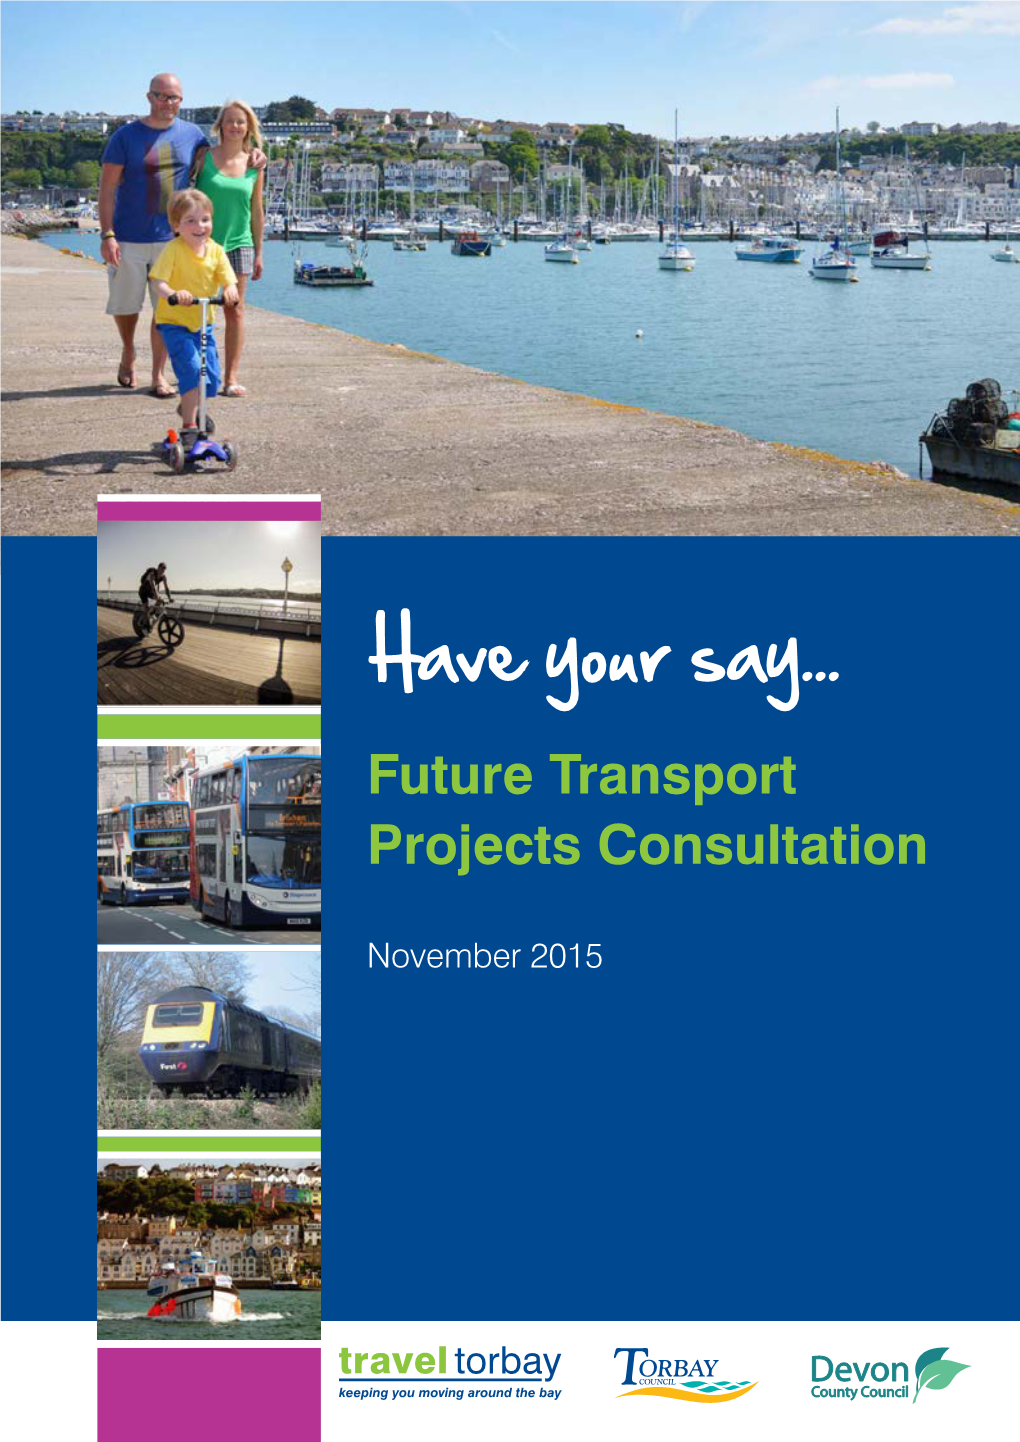 Future Transport Projects Consultation